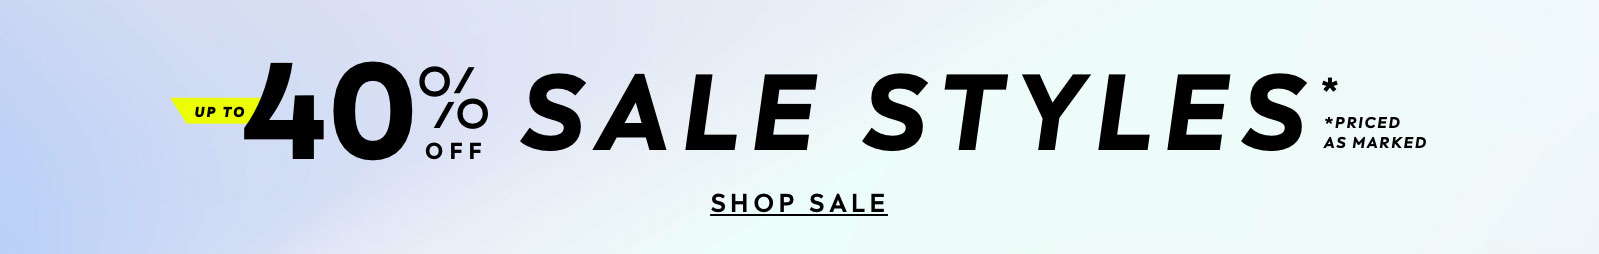 shop up to 40% off sale items